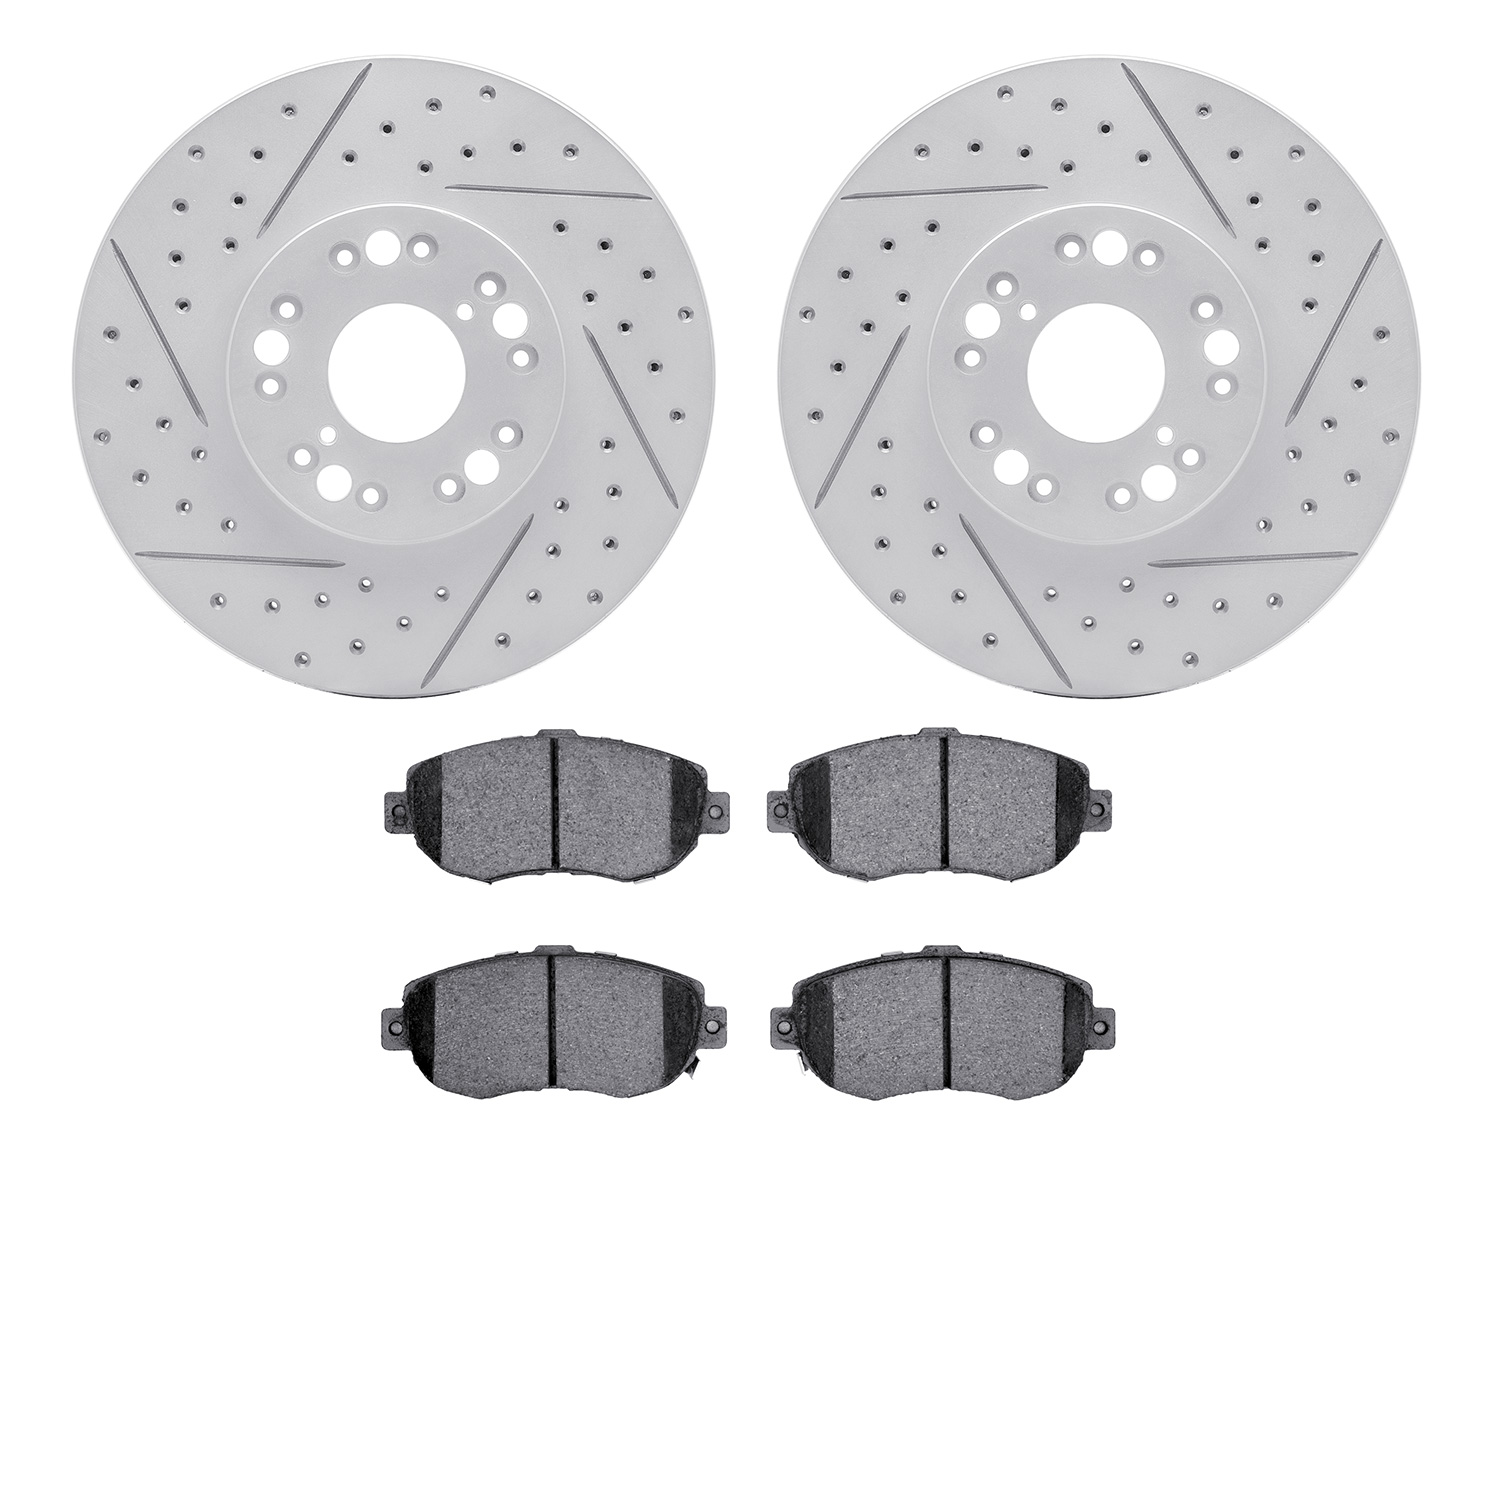 2502-75002 Geoperformance Drilled/Slotted Rotors w/5000 Advanced Brake Pads Kit, 1993-2010 Lexus/Toyota/Scion, Position: Front